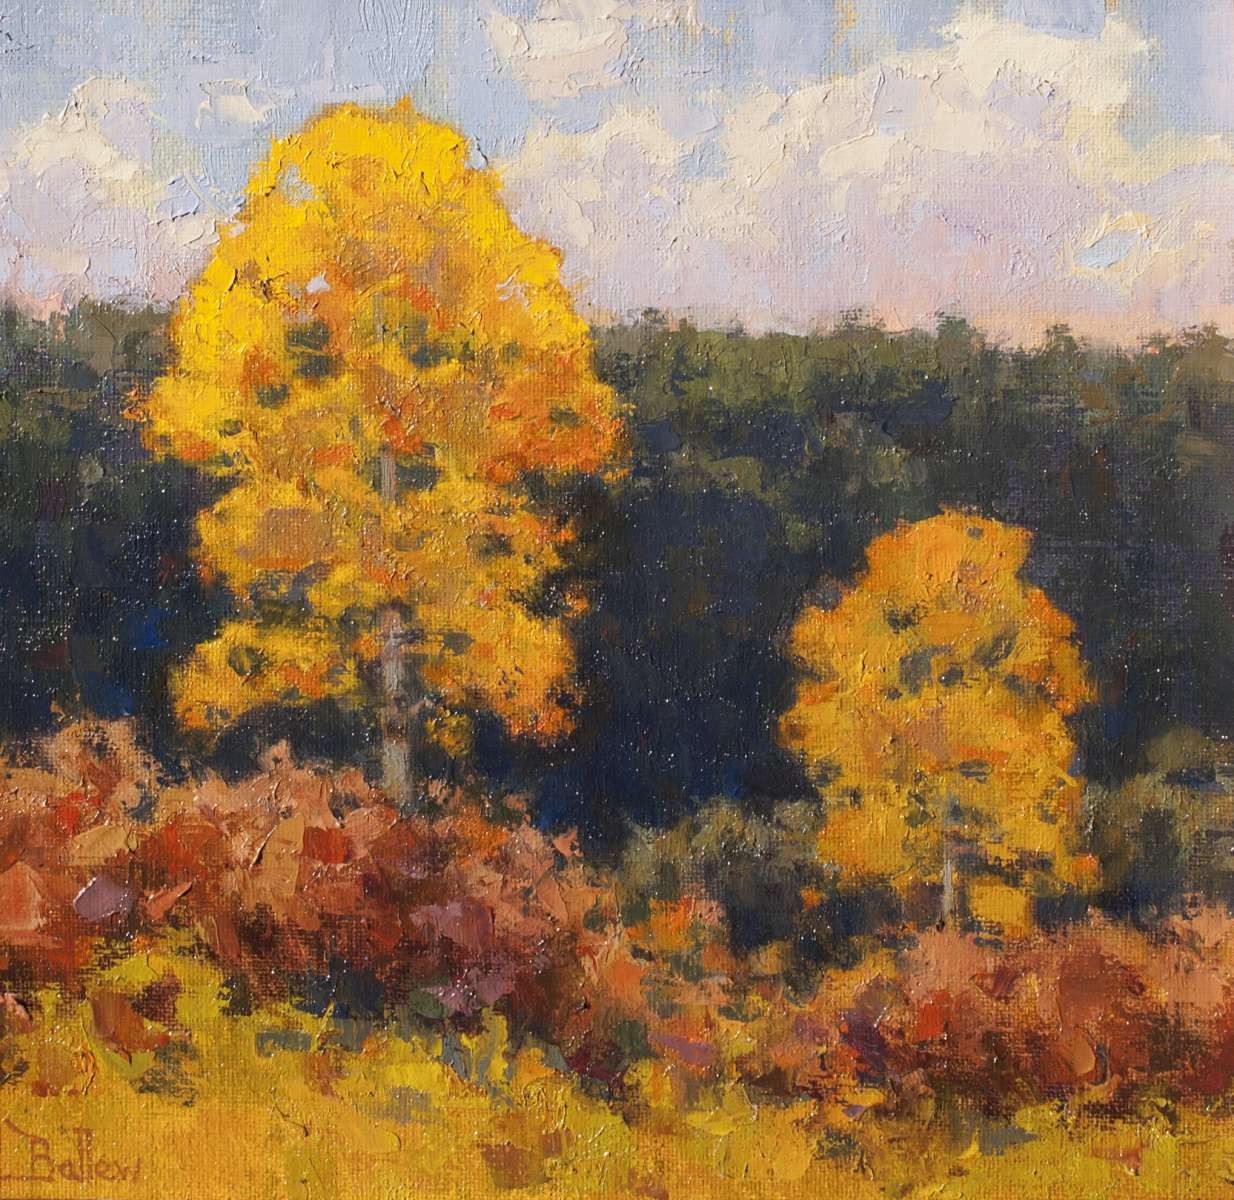 October Oaks and Aspens by David Ballew